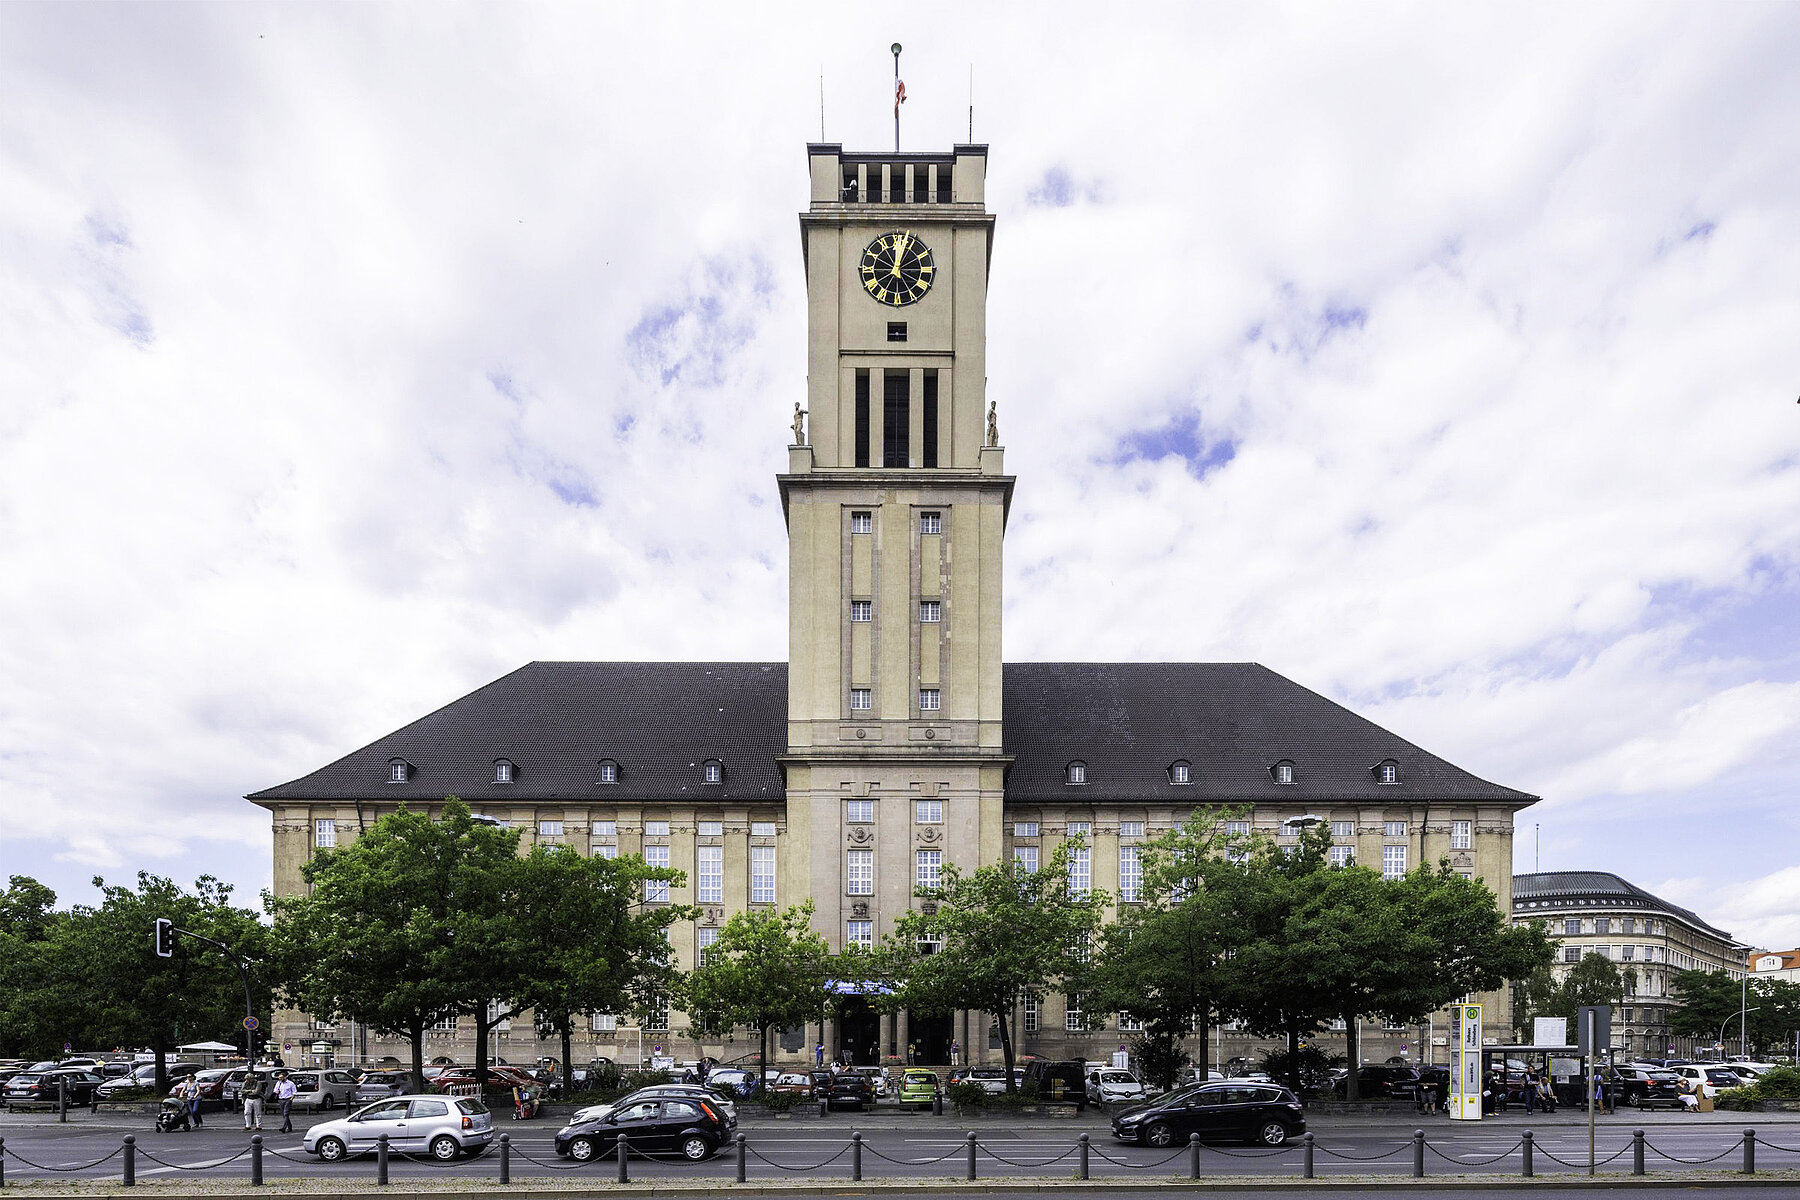 Rathaus Schöneberg with a street and cars in the foreground.